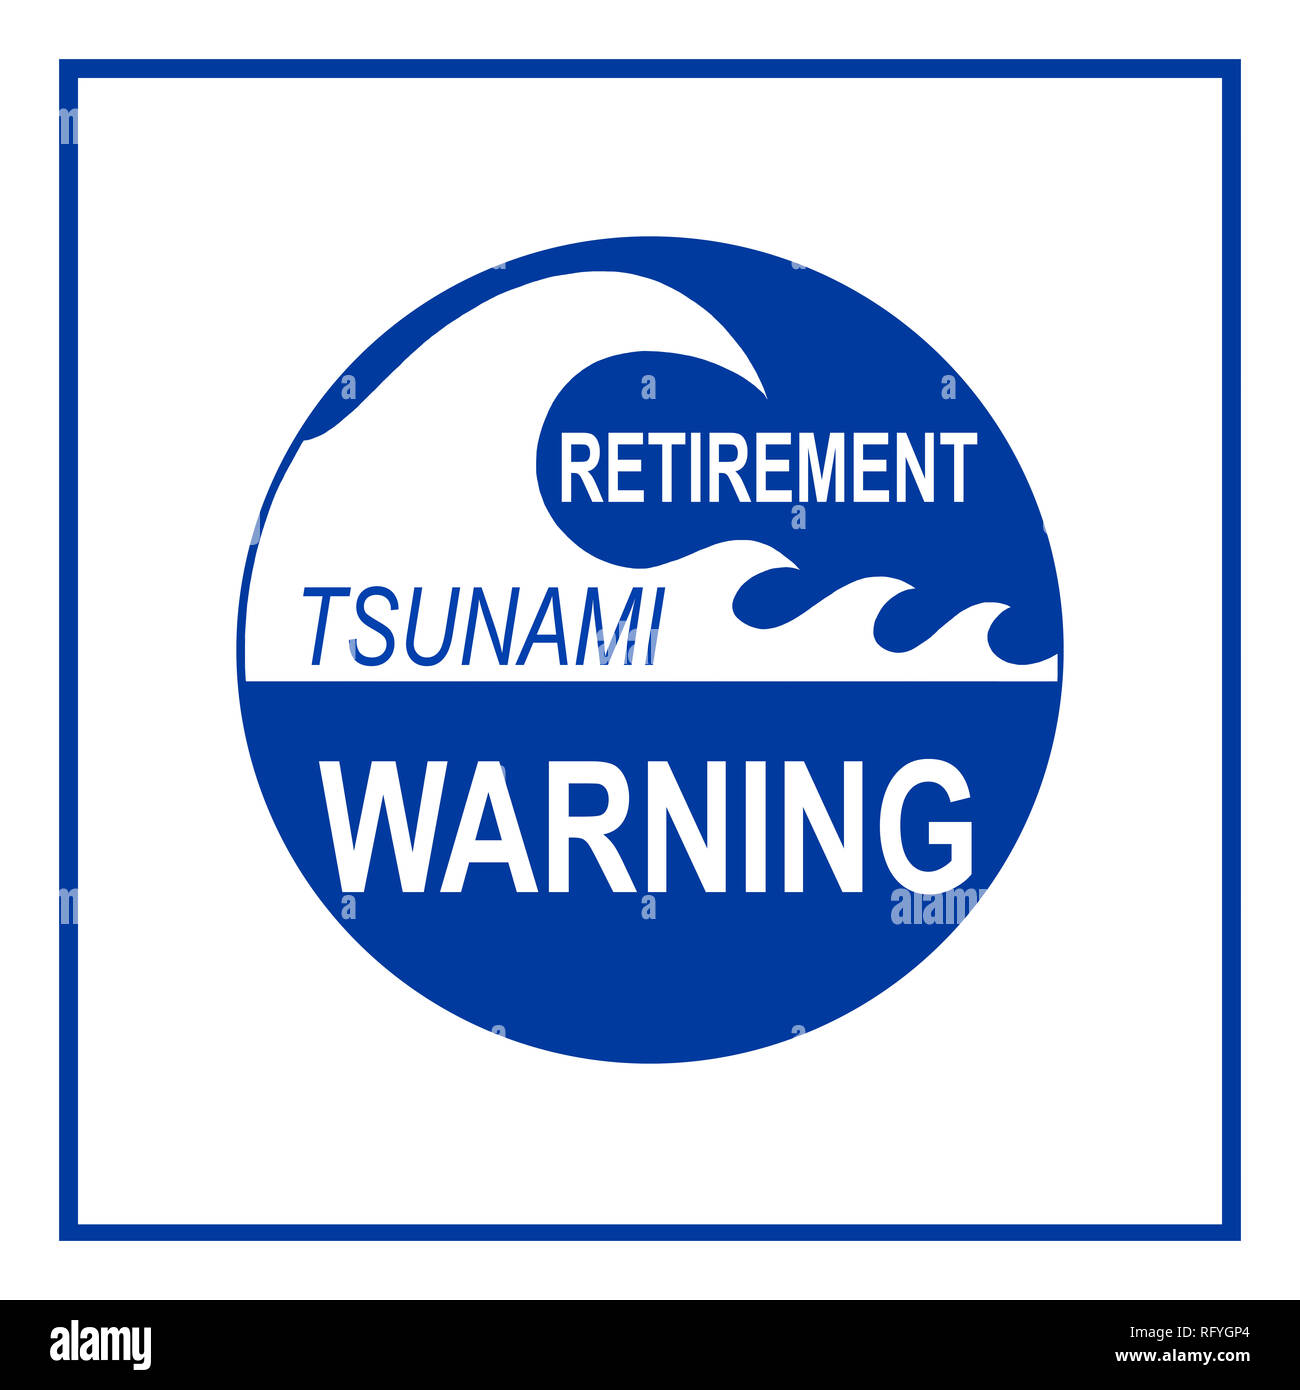 Retirment Tsunami Hazard warning sign isolated on white background. Concept based on baby boomers soon to reach retirement age and lack of incoming wo Stock Photo